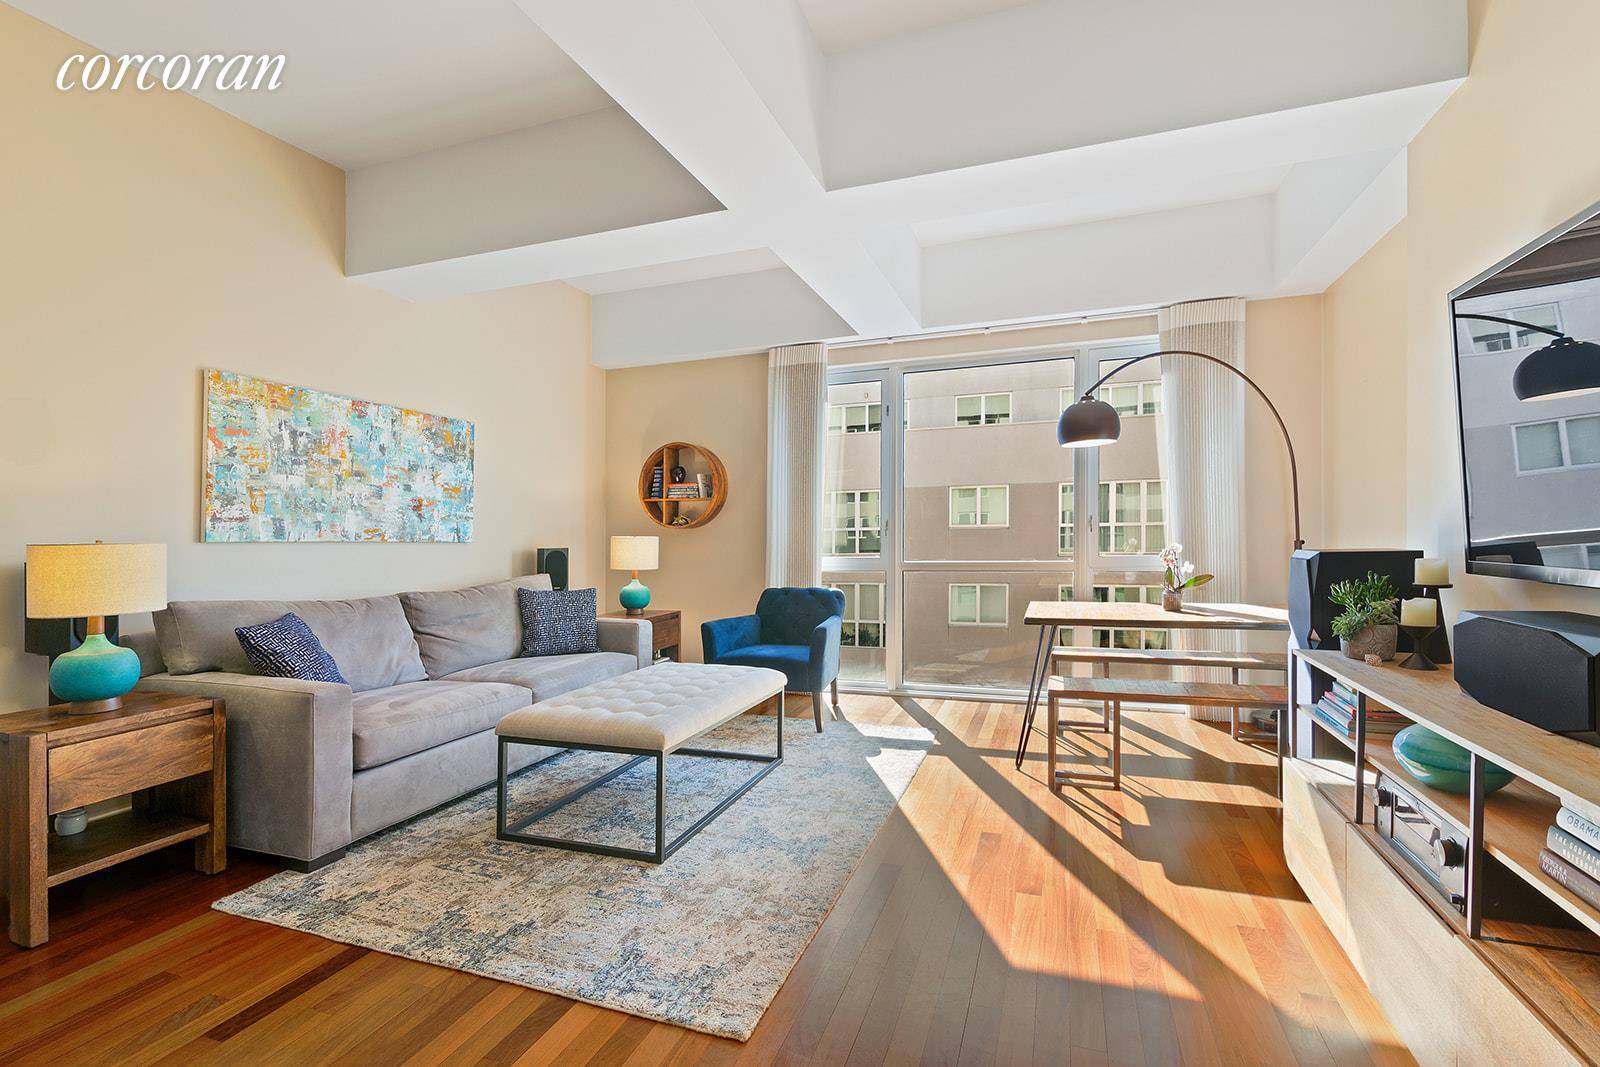 125 NORTH 10TH STREET, APARTMENT N4E, PRIME WILLIAMSBURG SPACIOUS BRIGHT LOFT LIKE PRIVATE CABANA W D 7 CLOSETS Tremendous opportunity to purchase one of the largest 2 bedroom, 2 bath ...